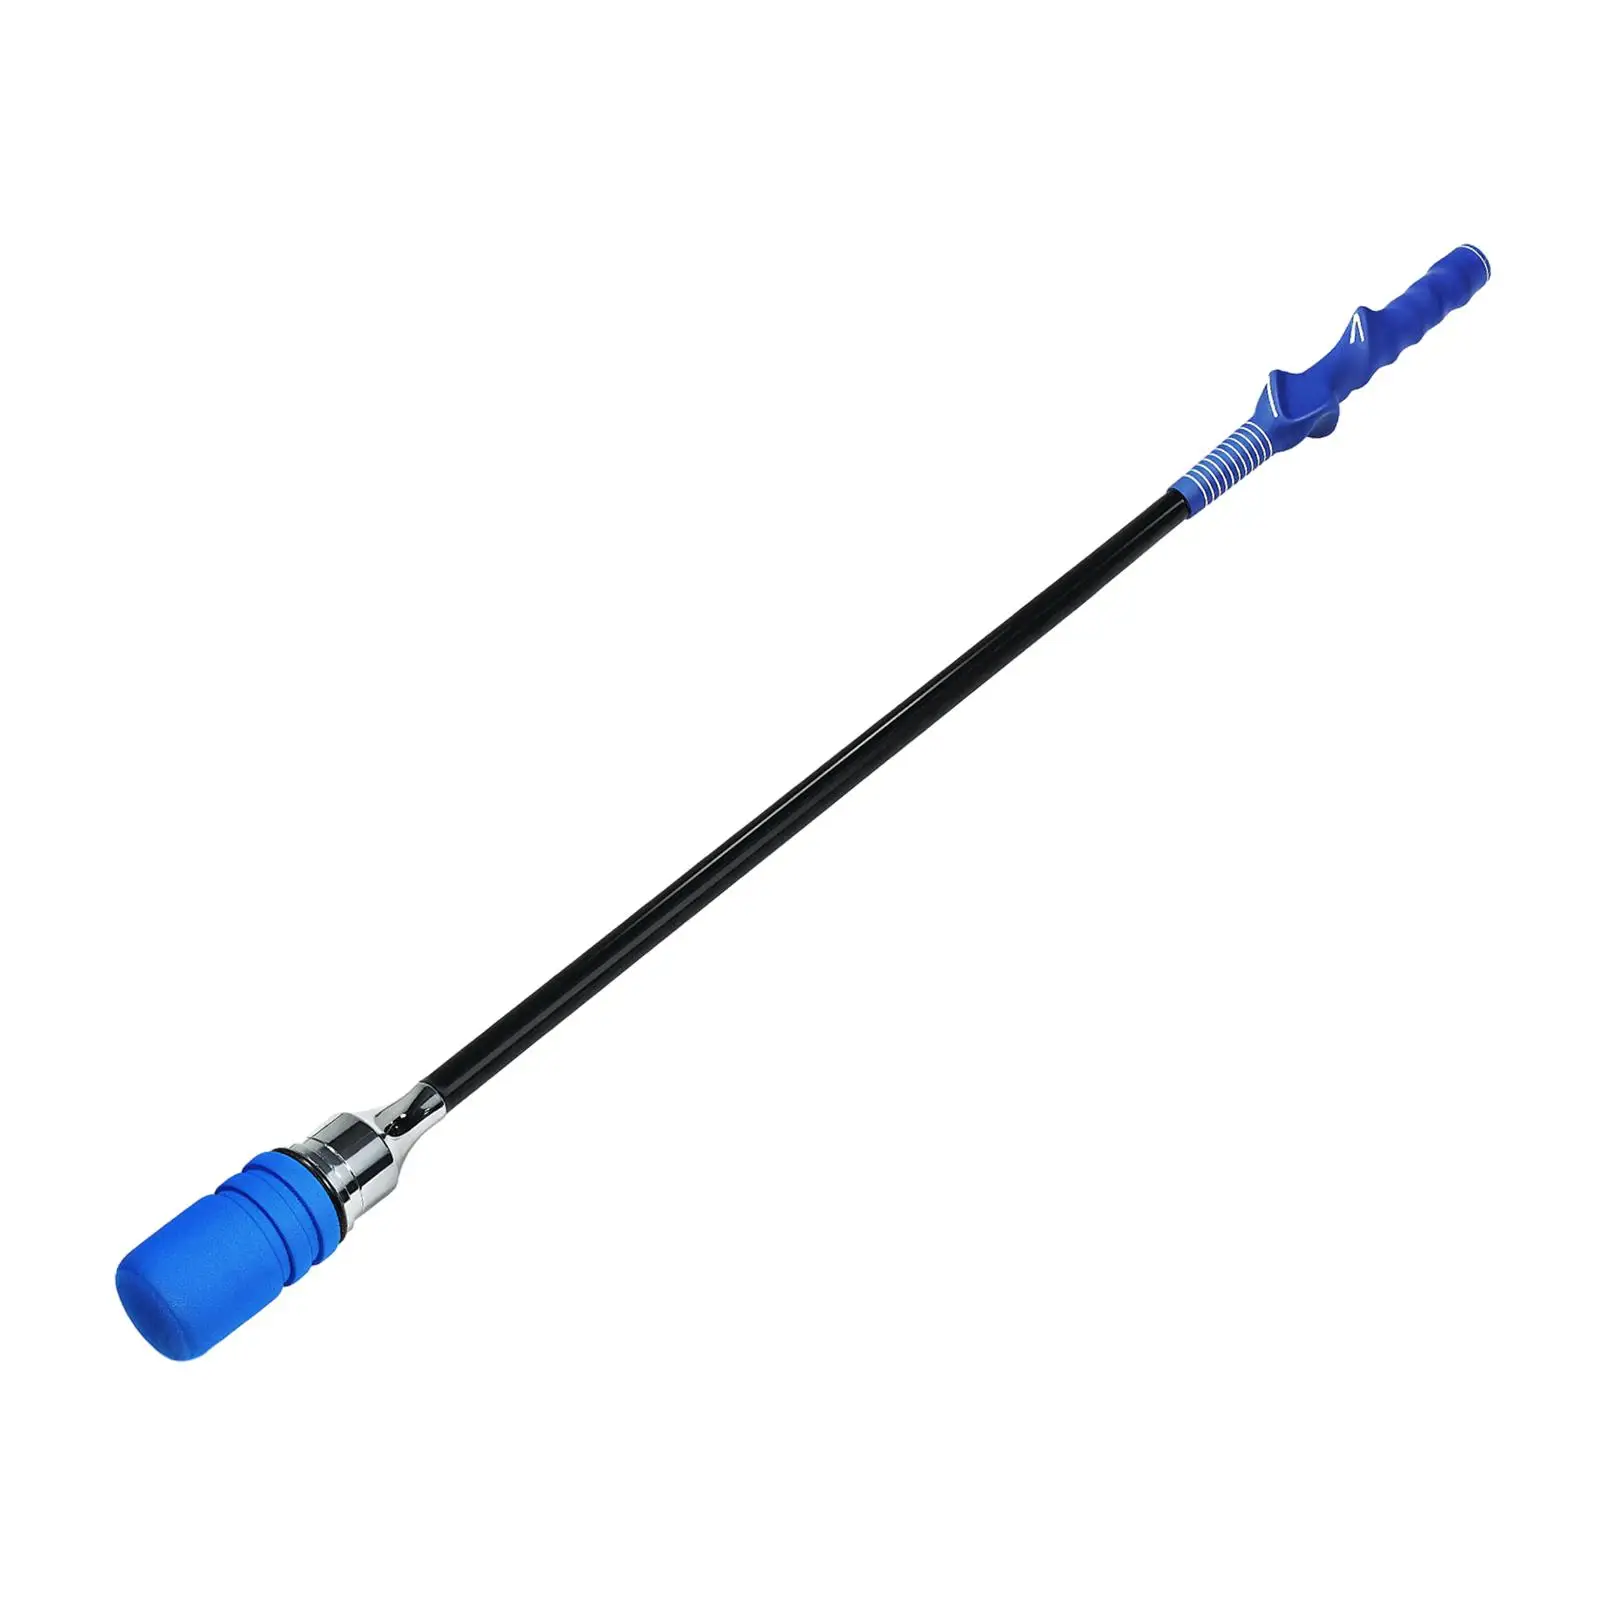 Golf Swing Trainer Golf Training Aid, Warm up Rod Golf Practice for Improved